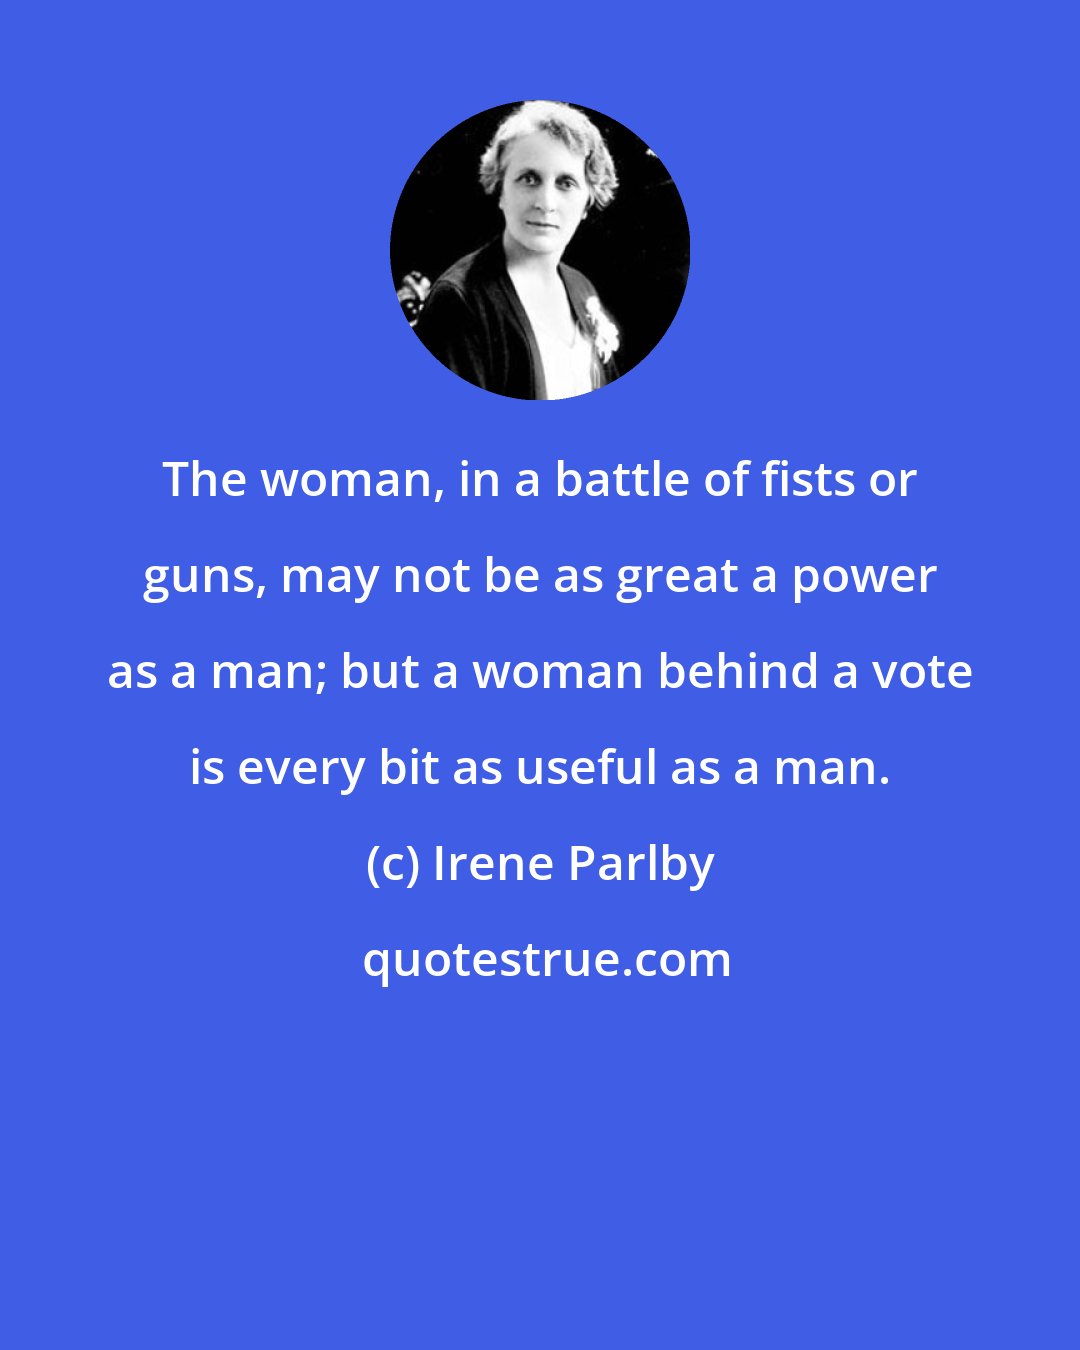 Irene Parlby: The woman, in a battle of fists or guns, may not be as great a power as a man; but a woman behind a vote is every bit as useful as a man.